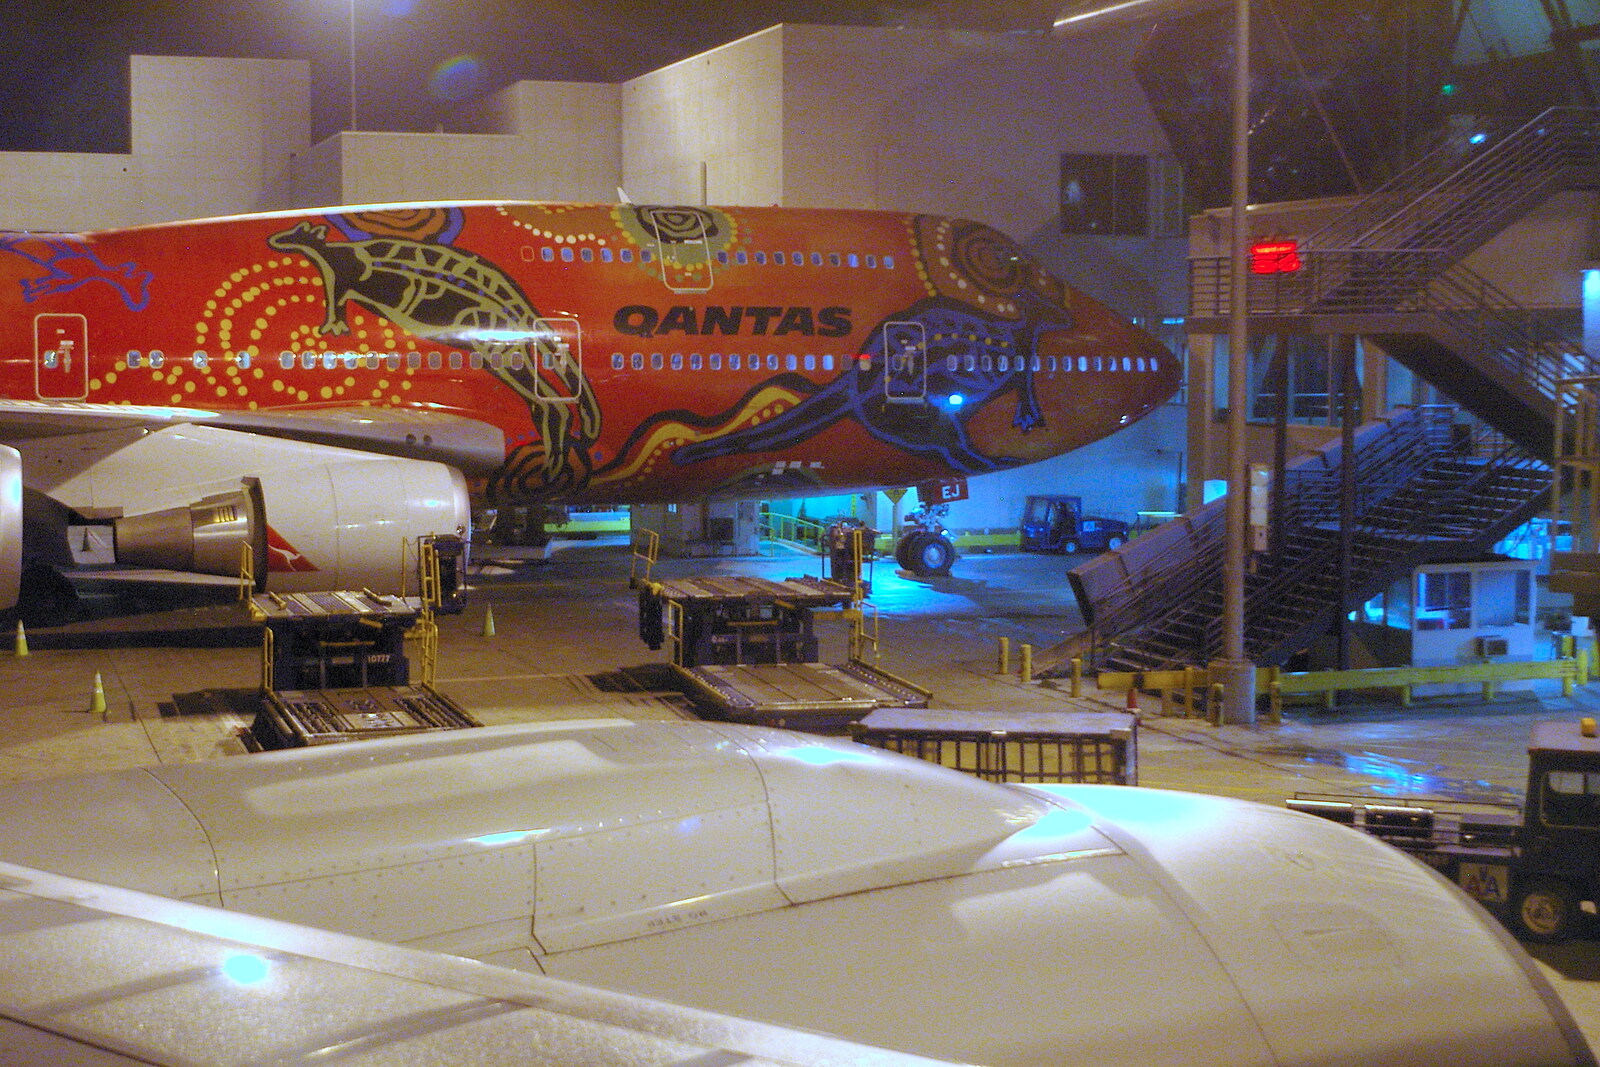 Scenes and People of Balboa Park, San Diego, California - 25th September 2005: A colourful Qantas 747 at LAX